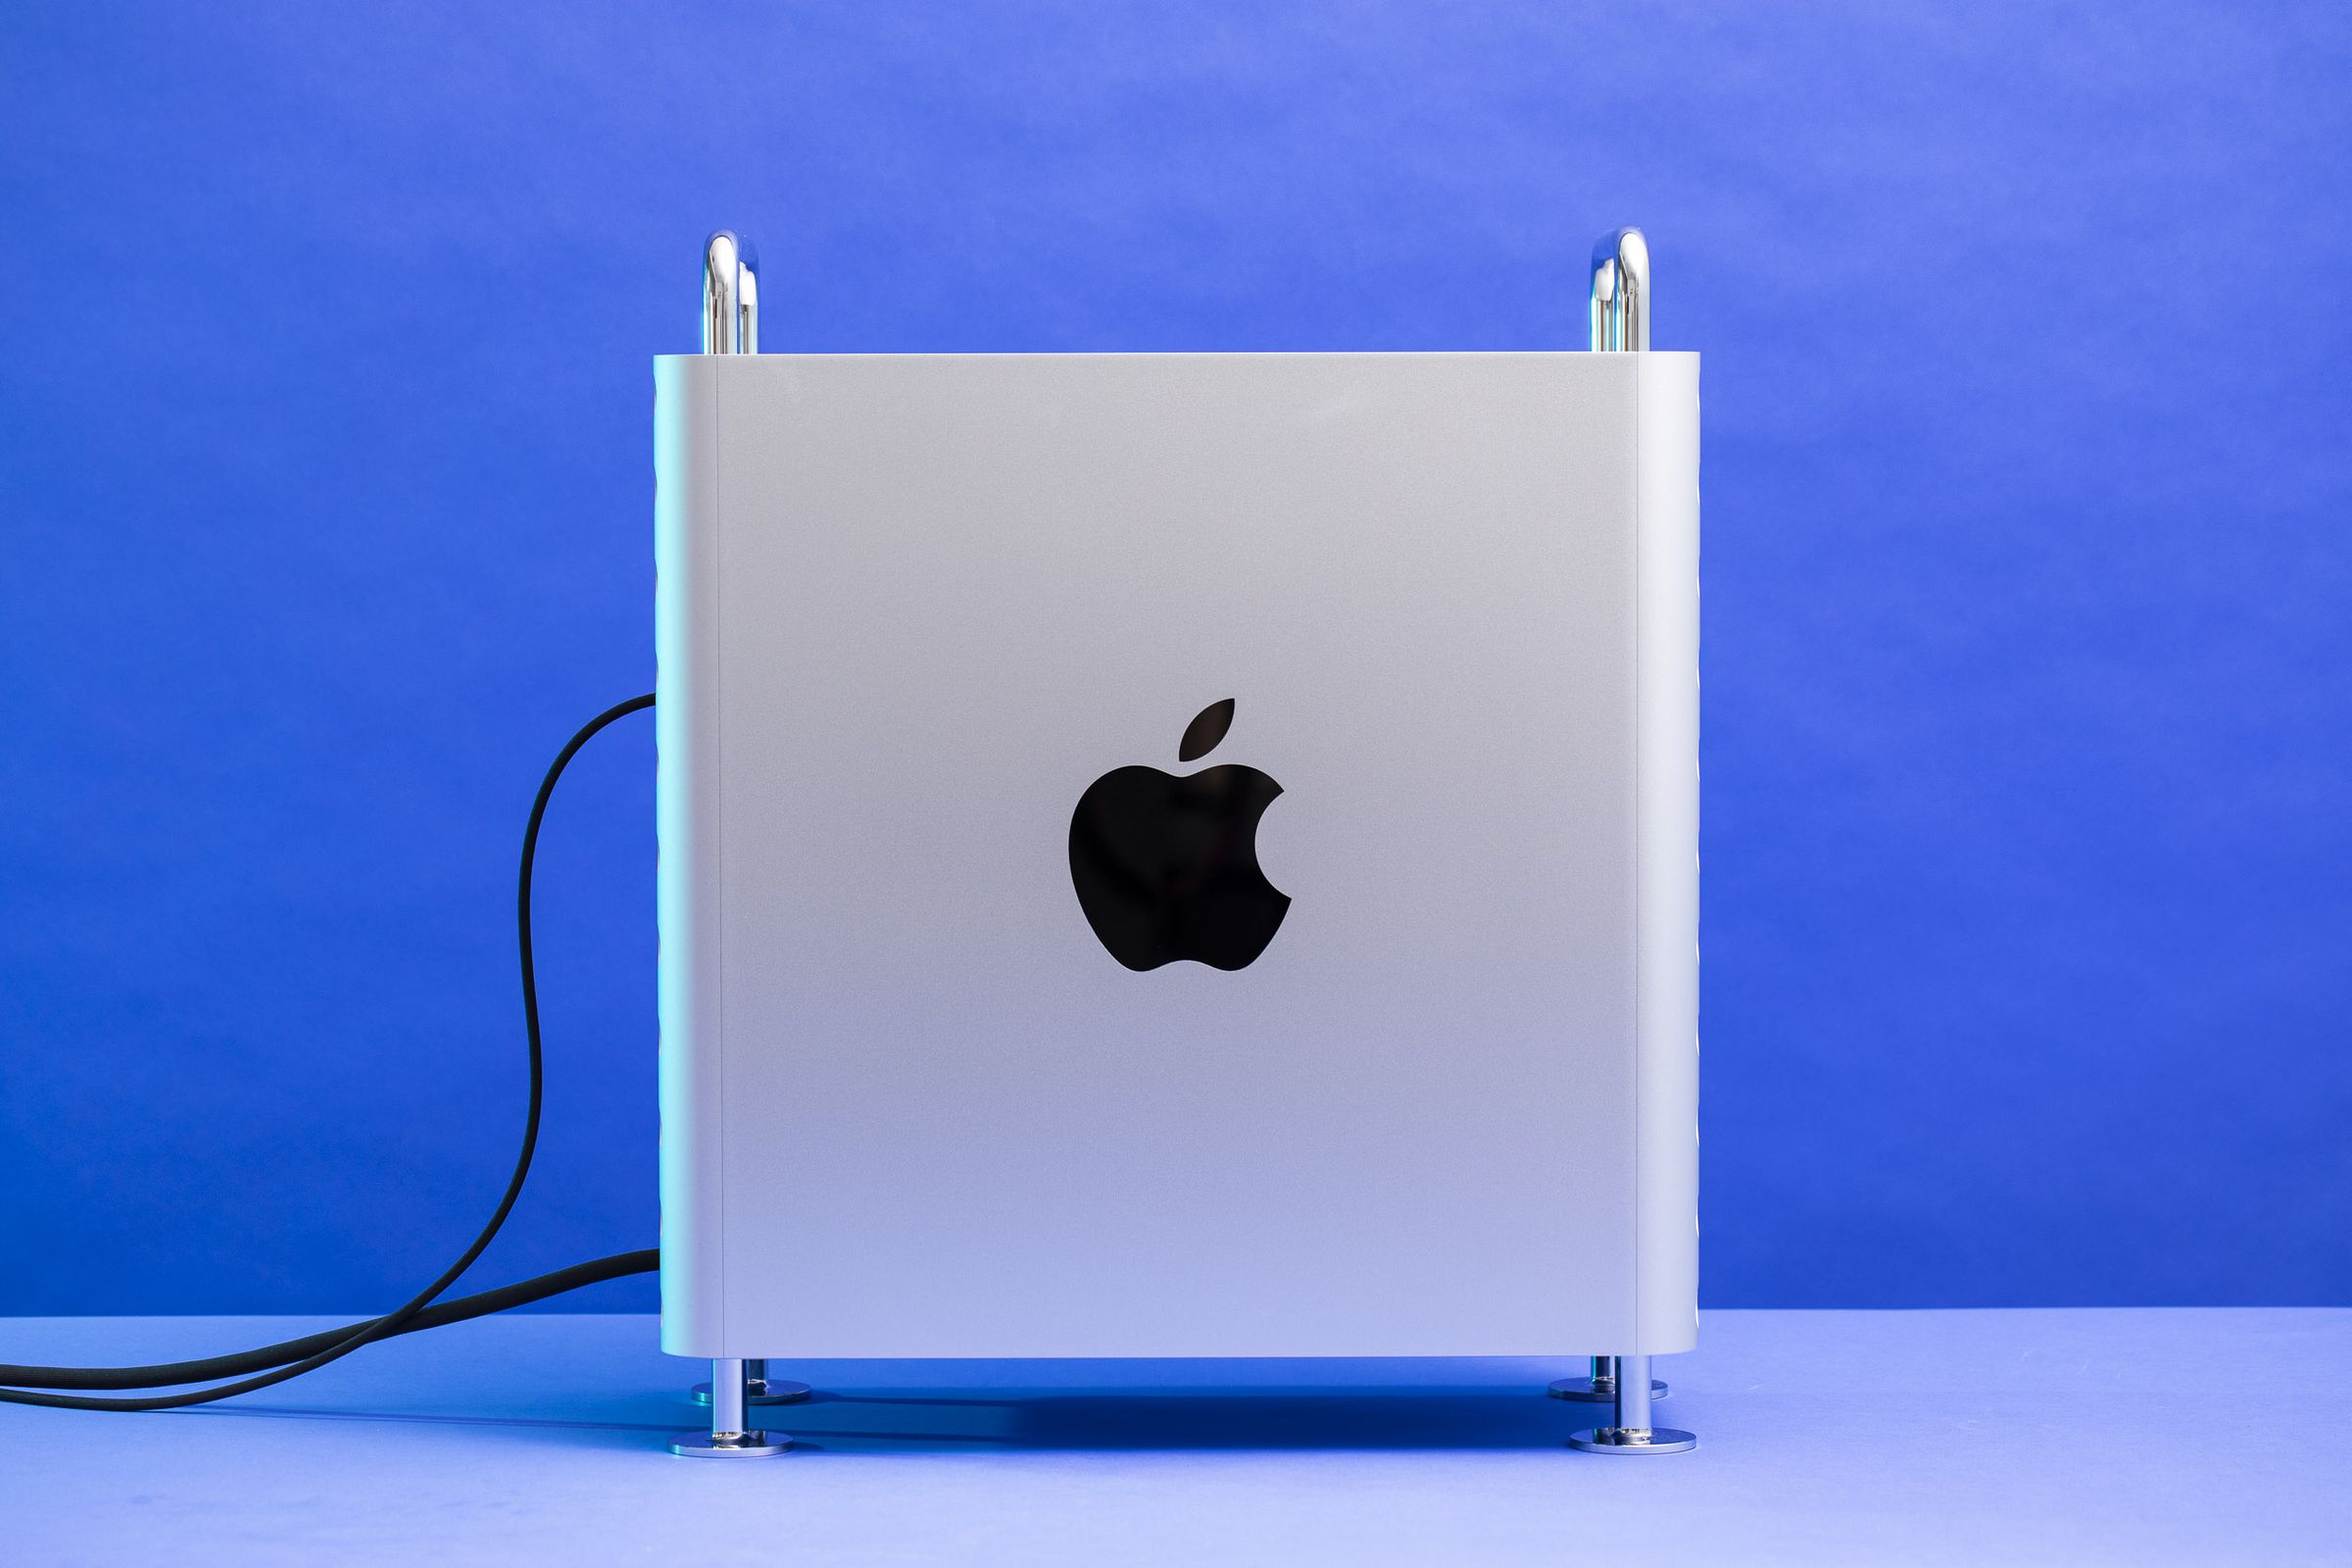 The Mac Pro seen from the side.